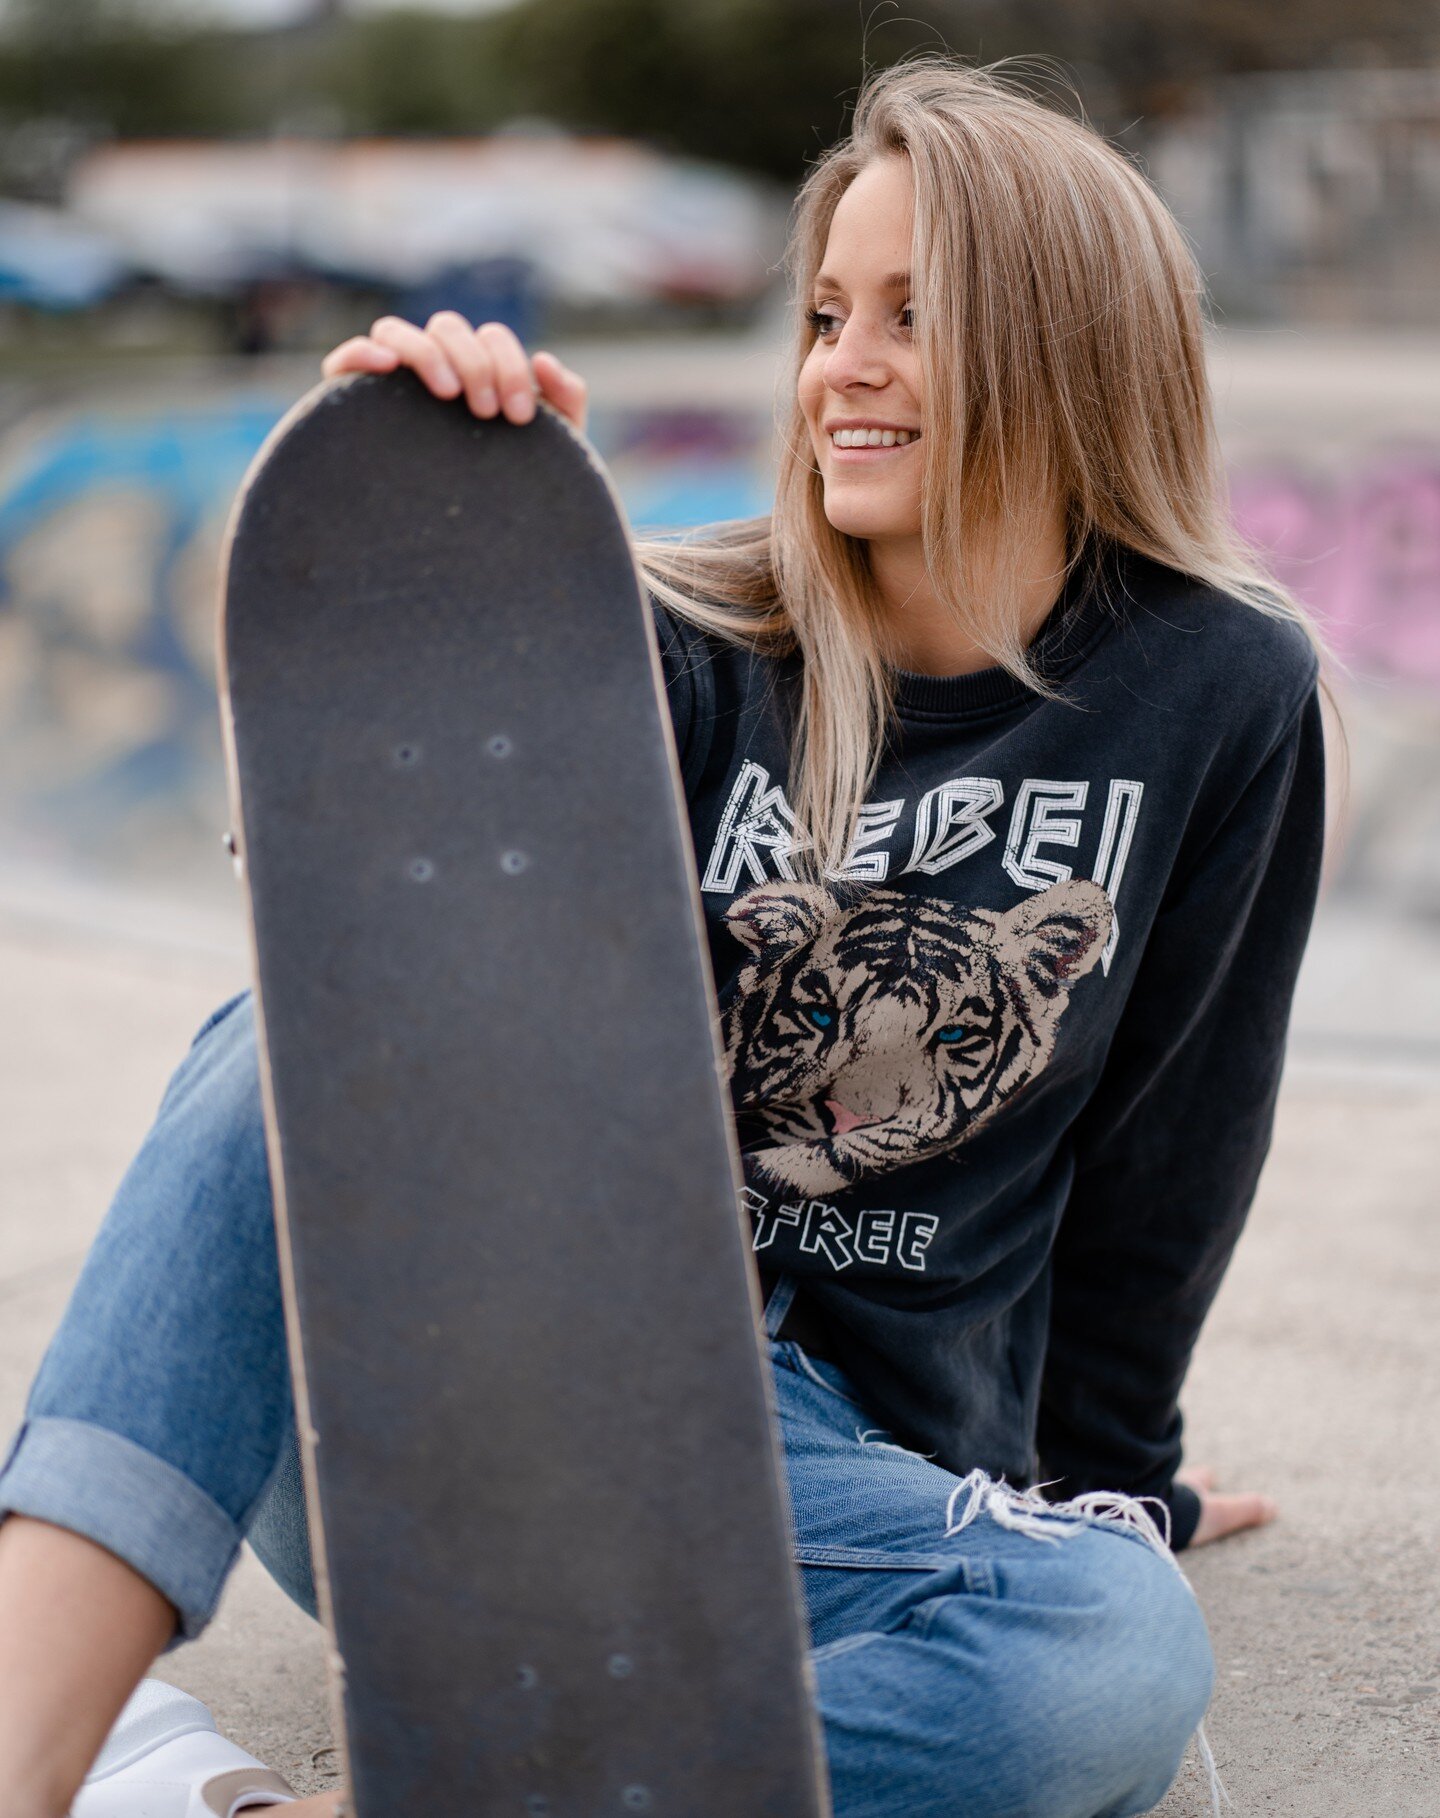 Continuing with the sport themed shot this time with a skate vibe!
.
.
@kayleighvdr
.
#visithasselt #portraitsofbelgium #folkportraits #portraitgames #moodyports #portrait_shots #portraitmood #makeportraits #portraitpage #profile_vision #pursuitofpor